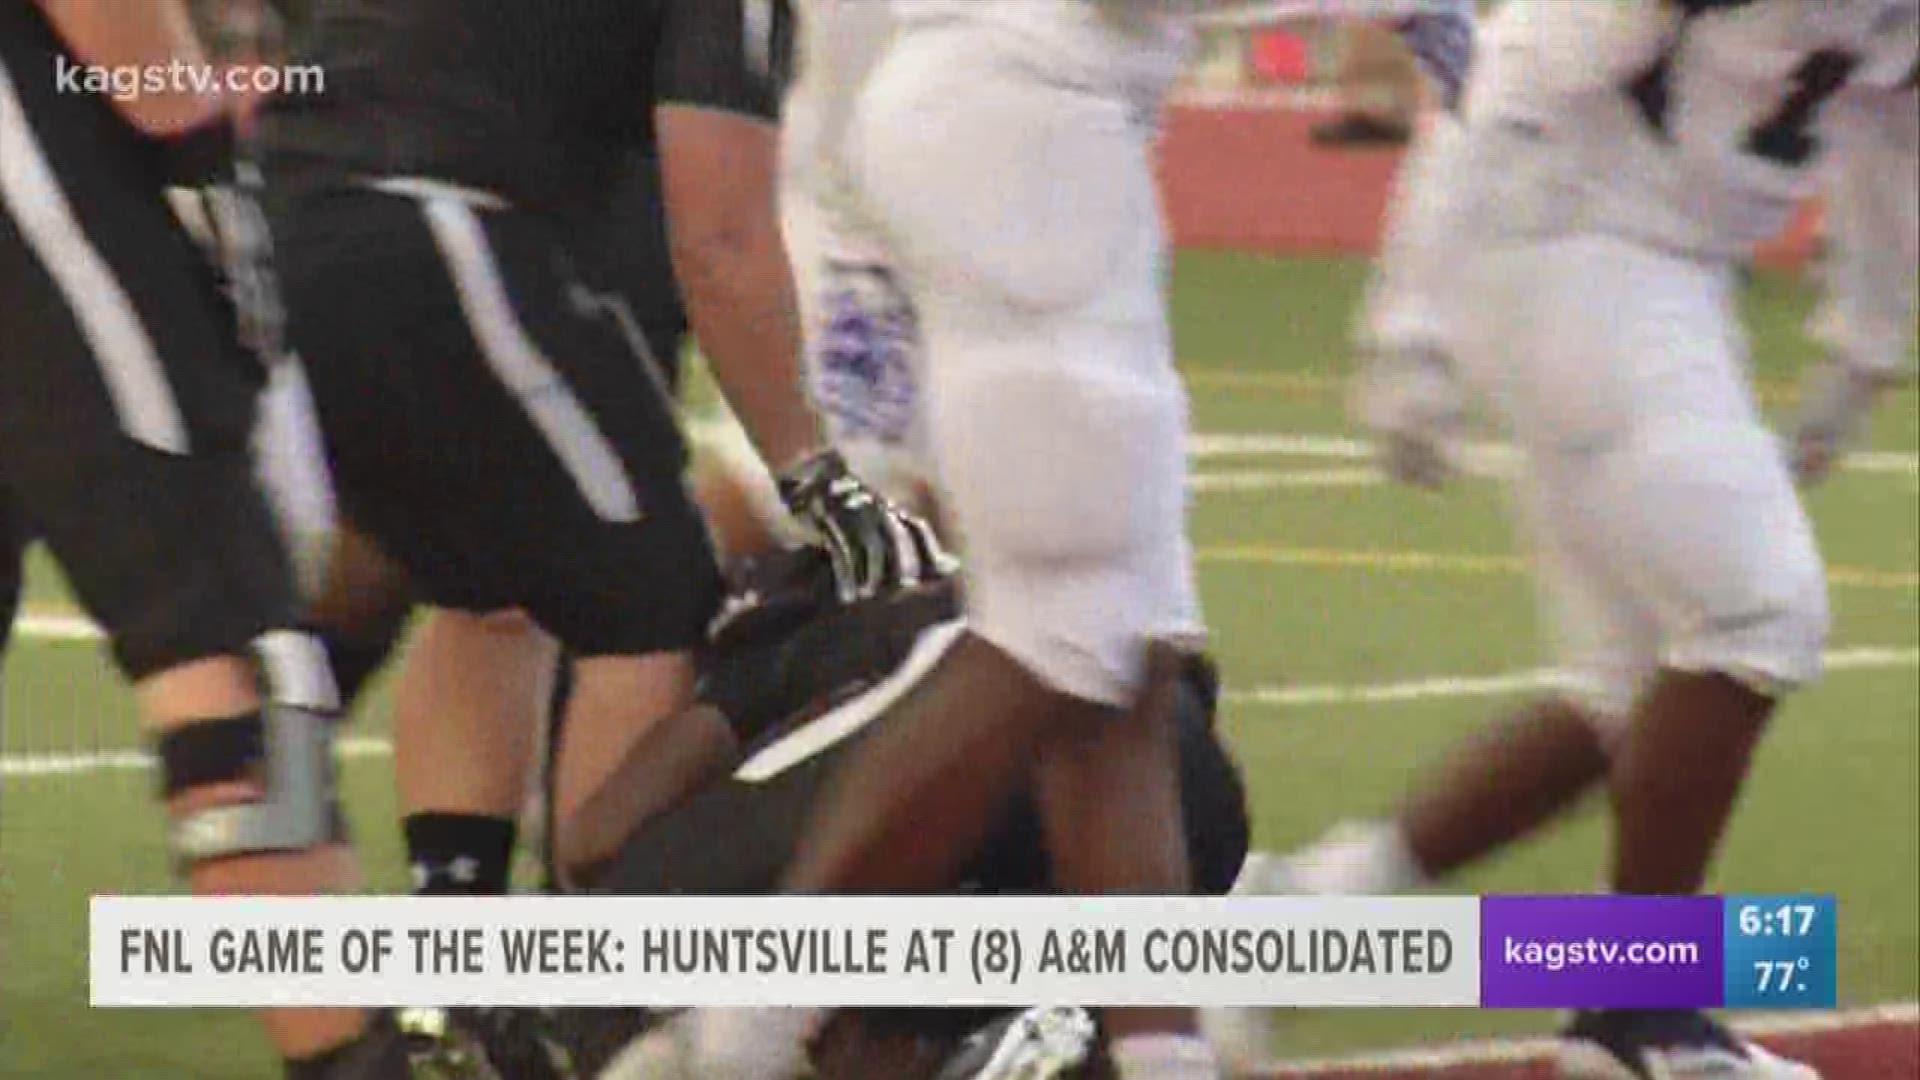 Here is a preview of the FNL Game of the Week between Huntsville and #8 A&M Consolidated.